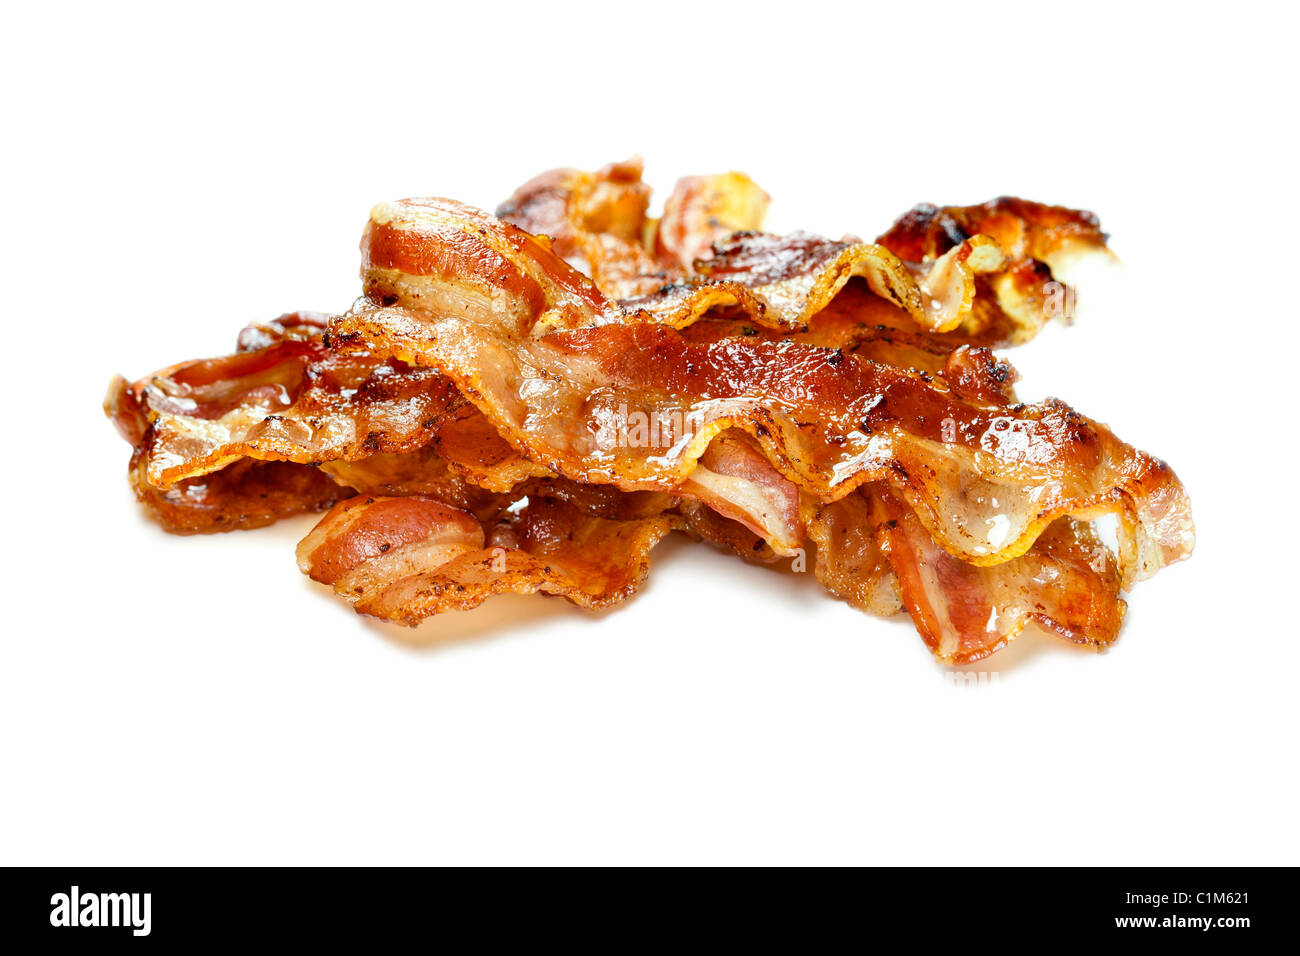 Cooked bacon isolated on white background. Charles Lupica Stock Photo